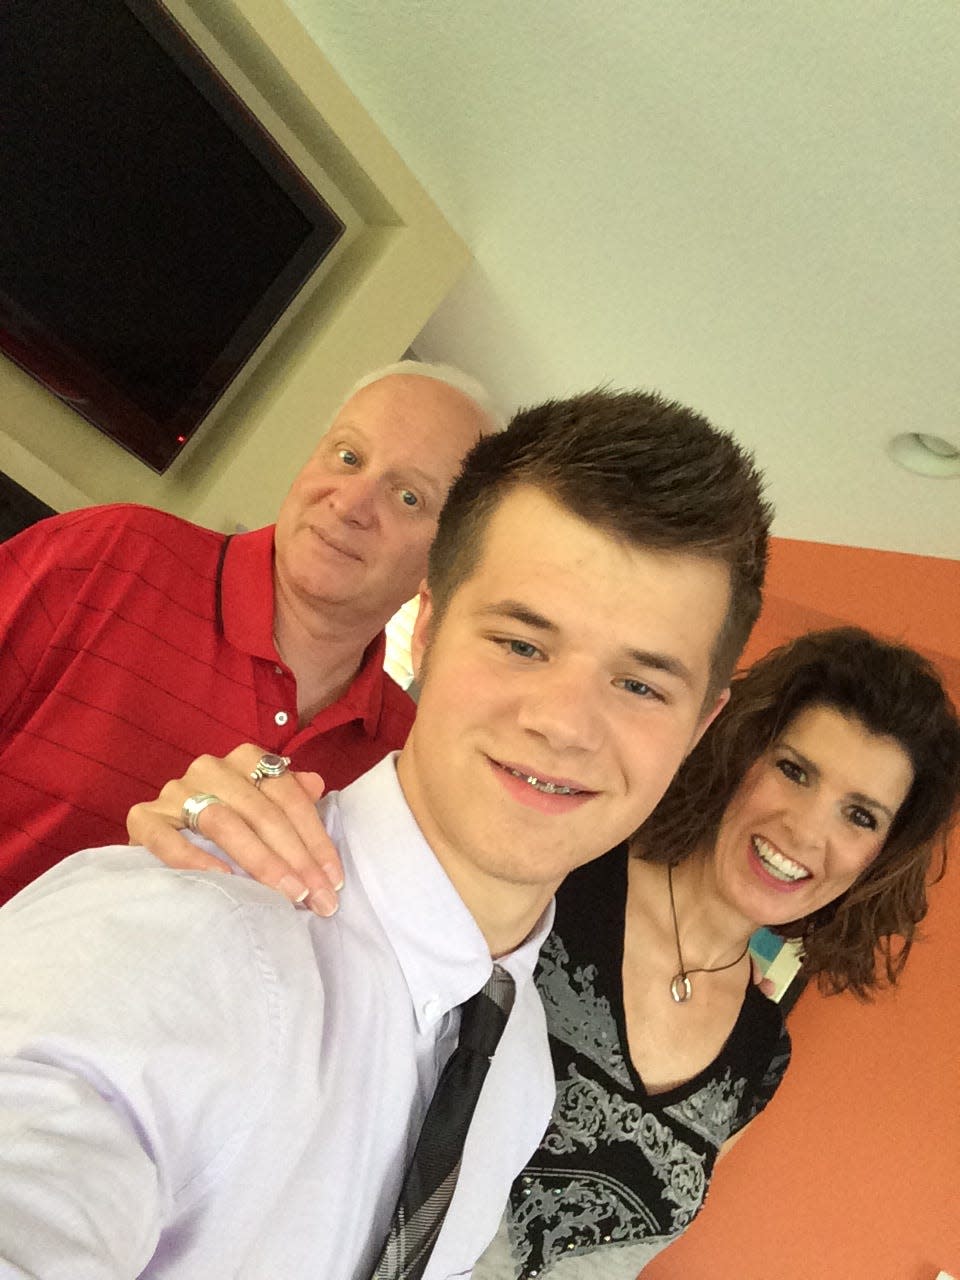 Sergei Neubauer and his parents take a picture in September 2014.